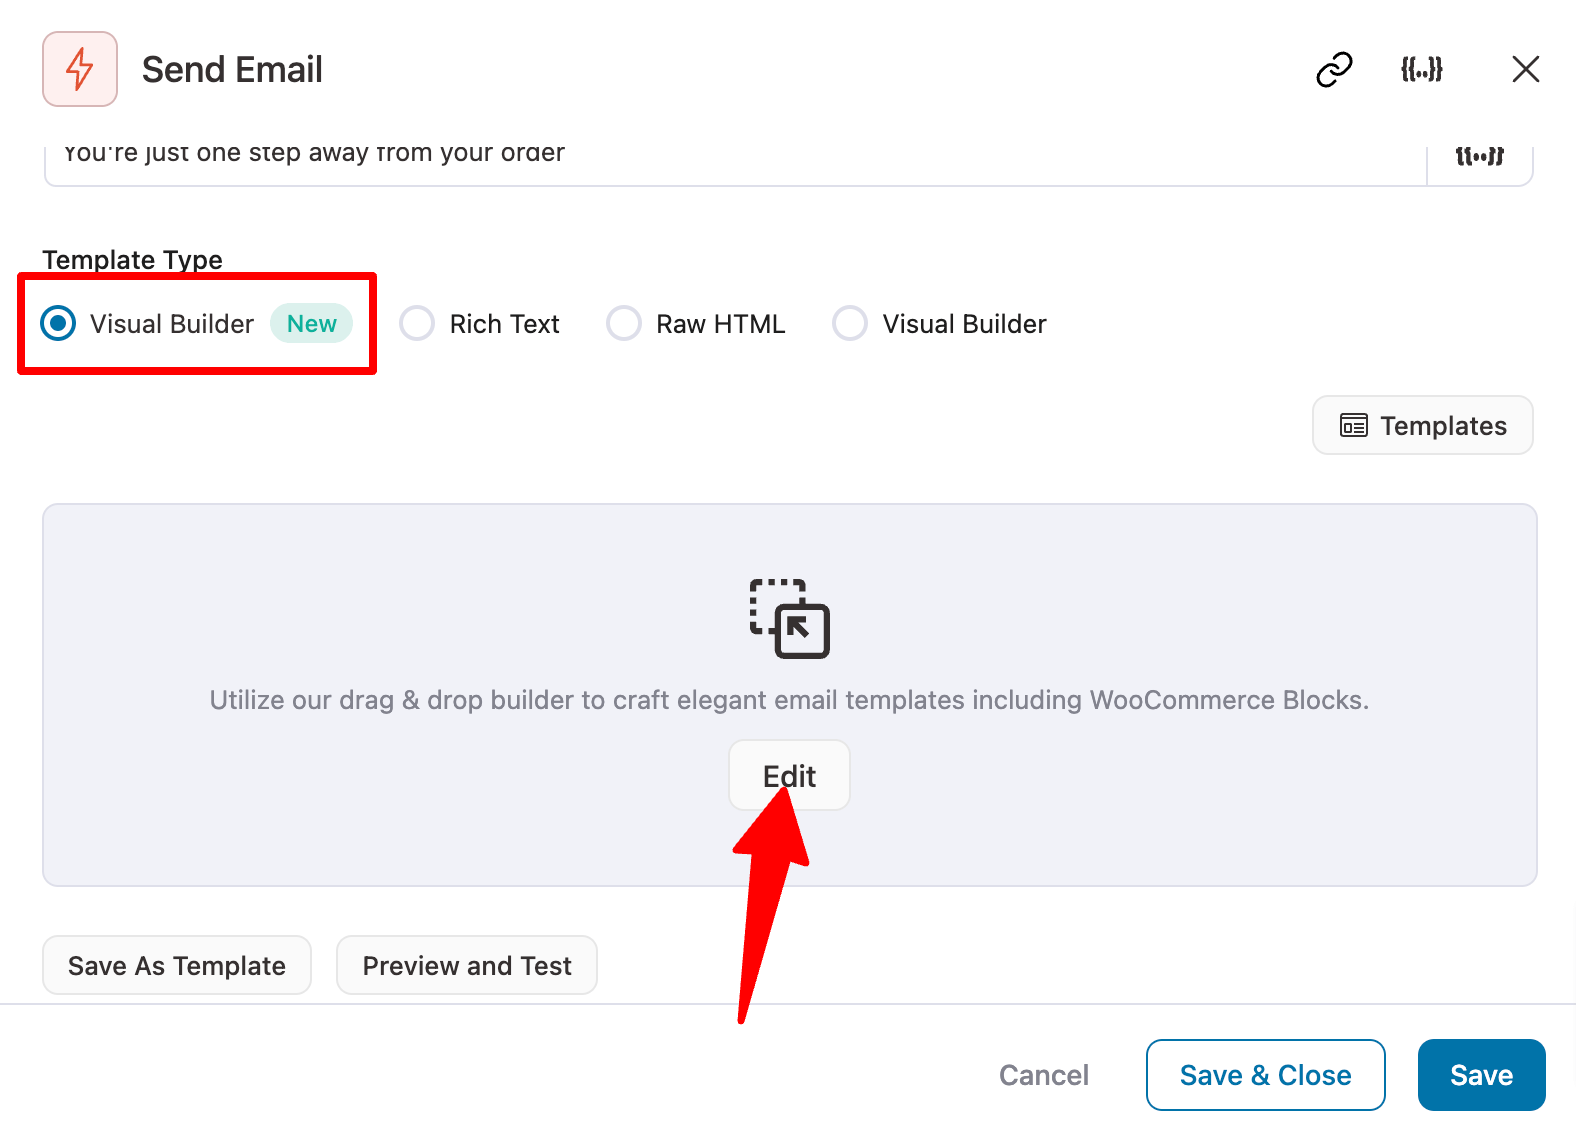 choose visual builder and click on edit to continue